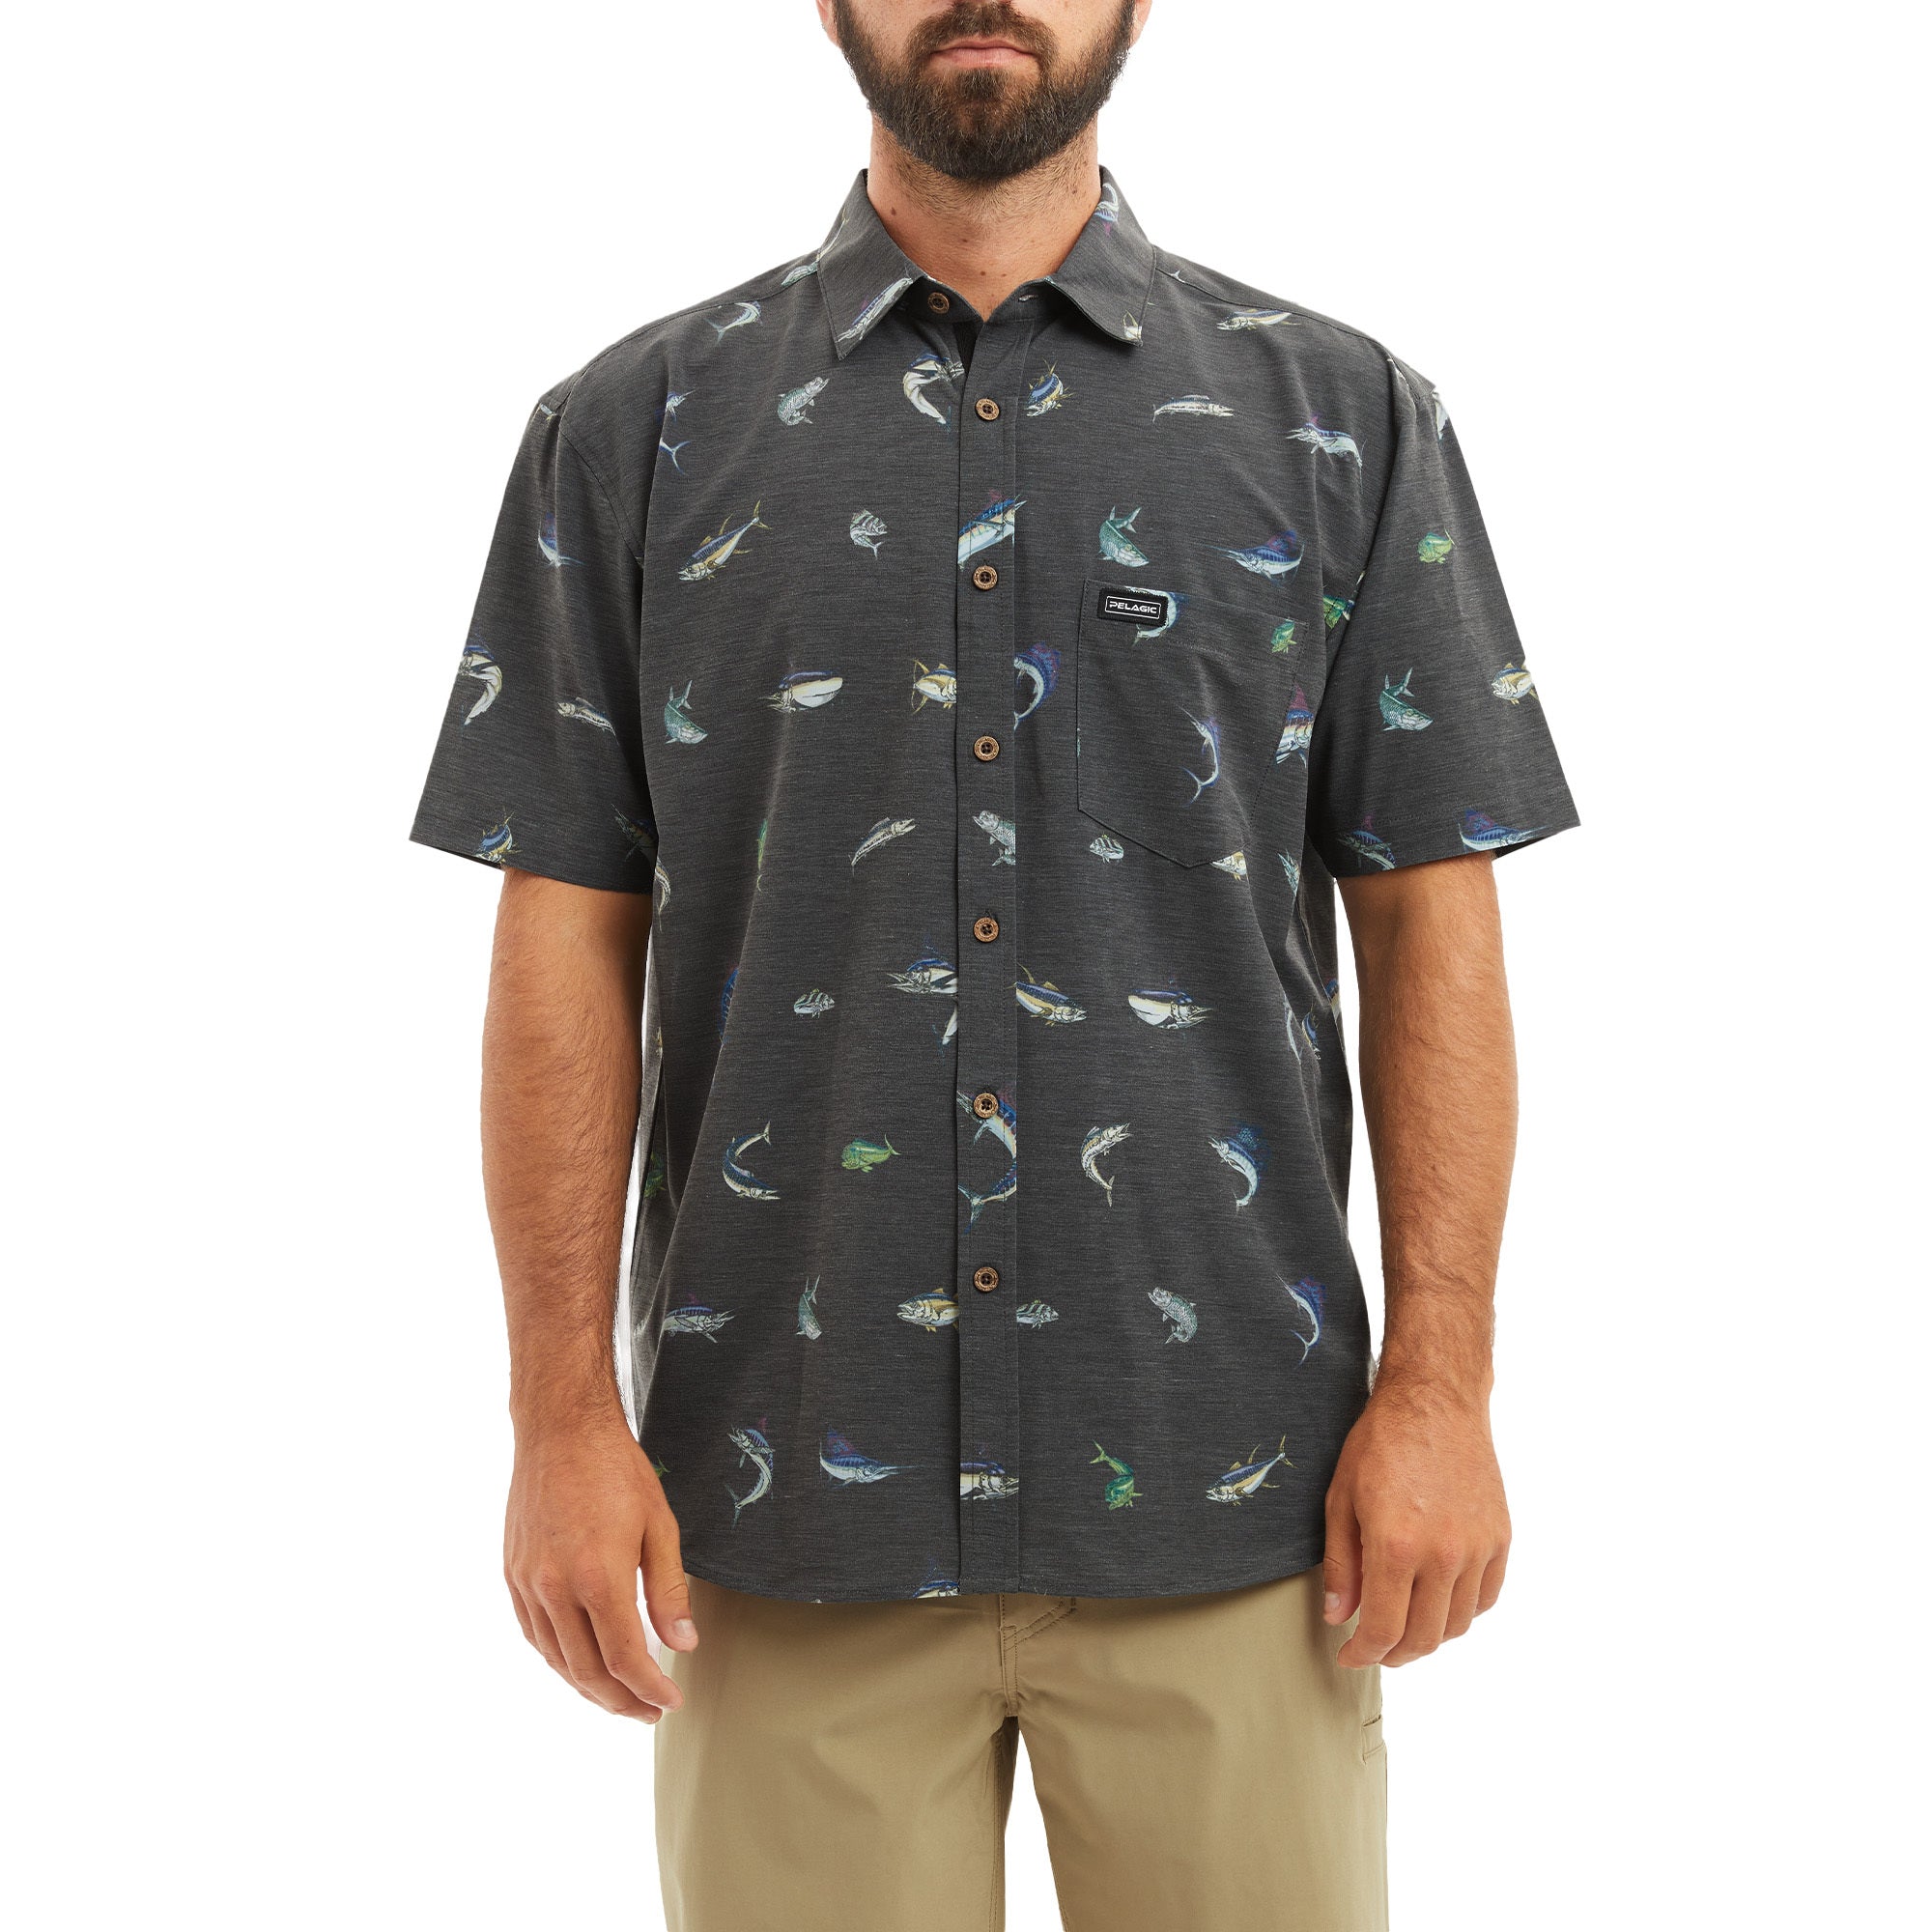 The Topshot Button Up